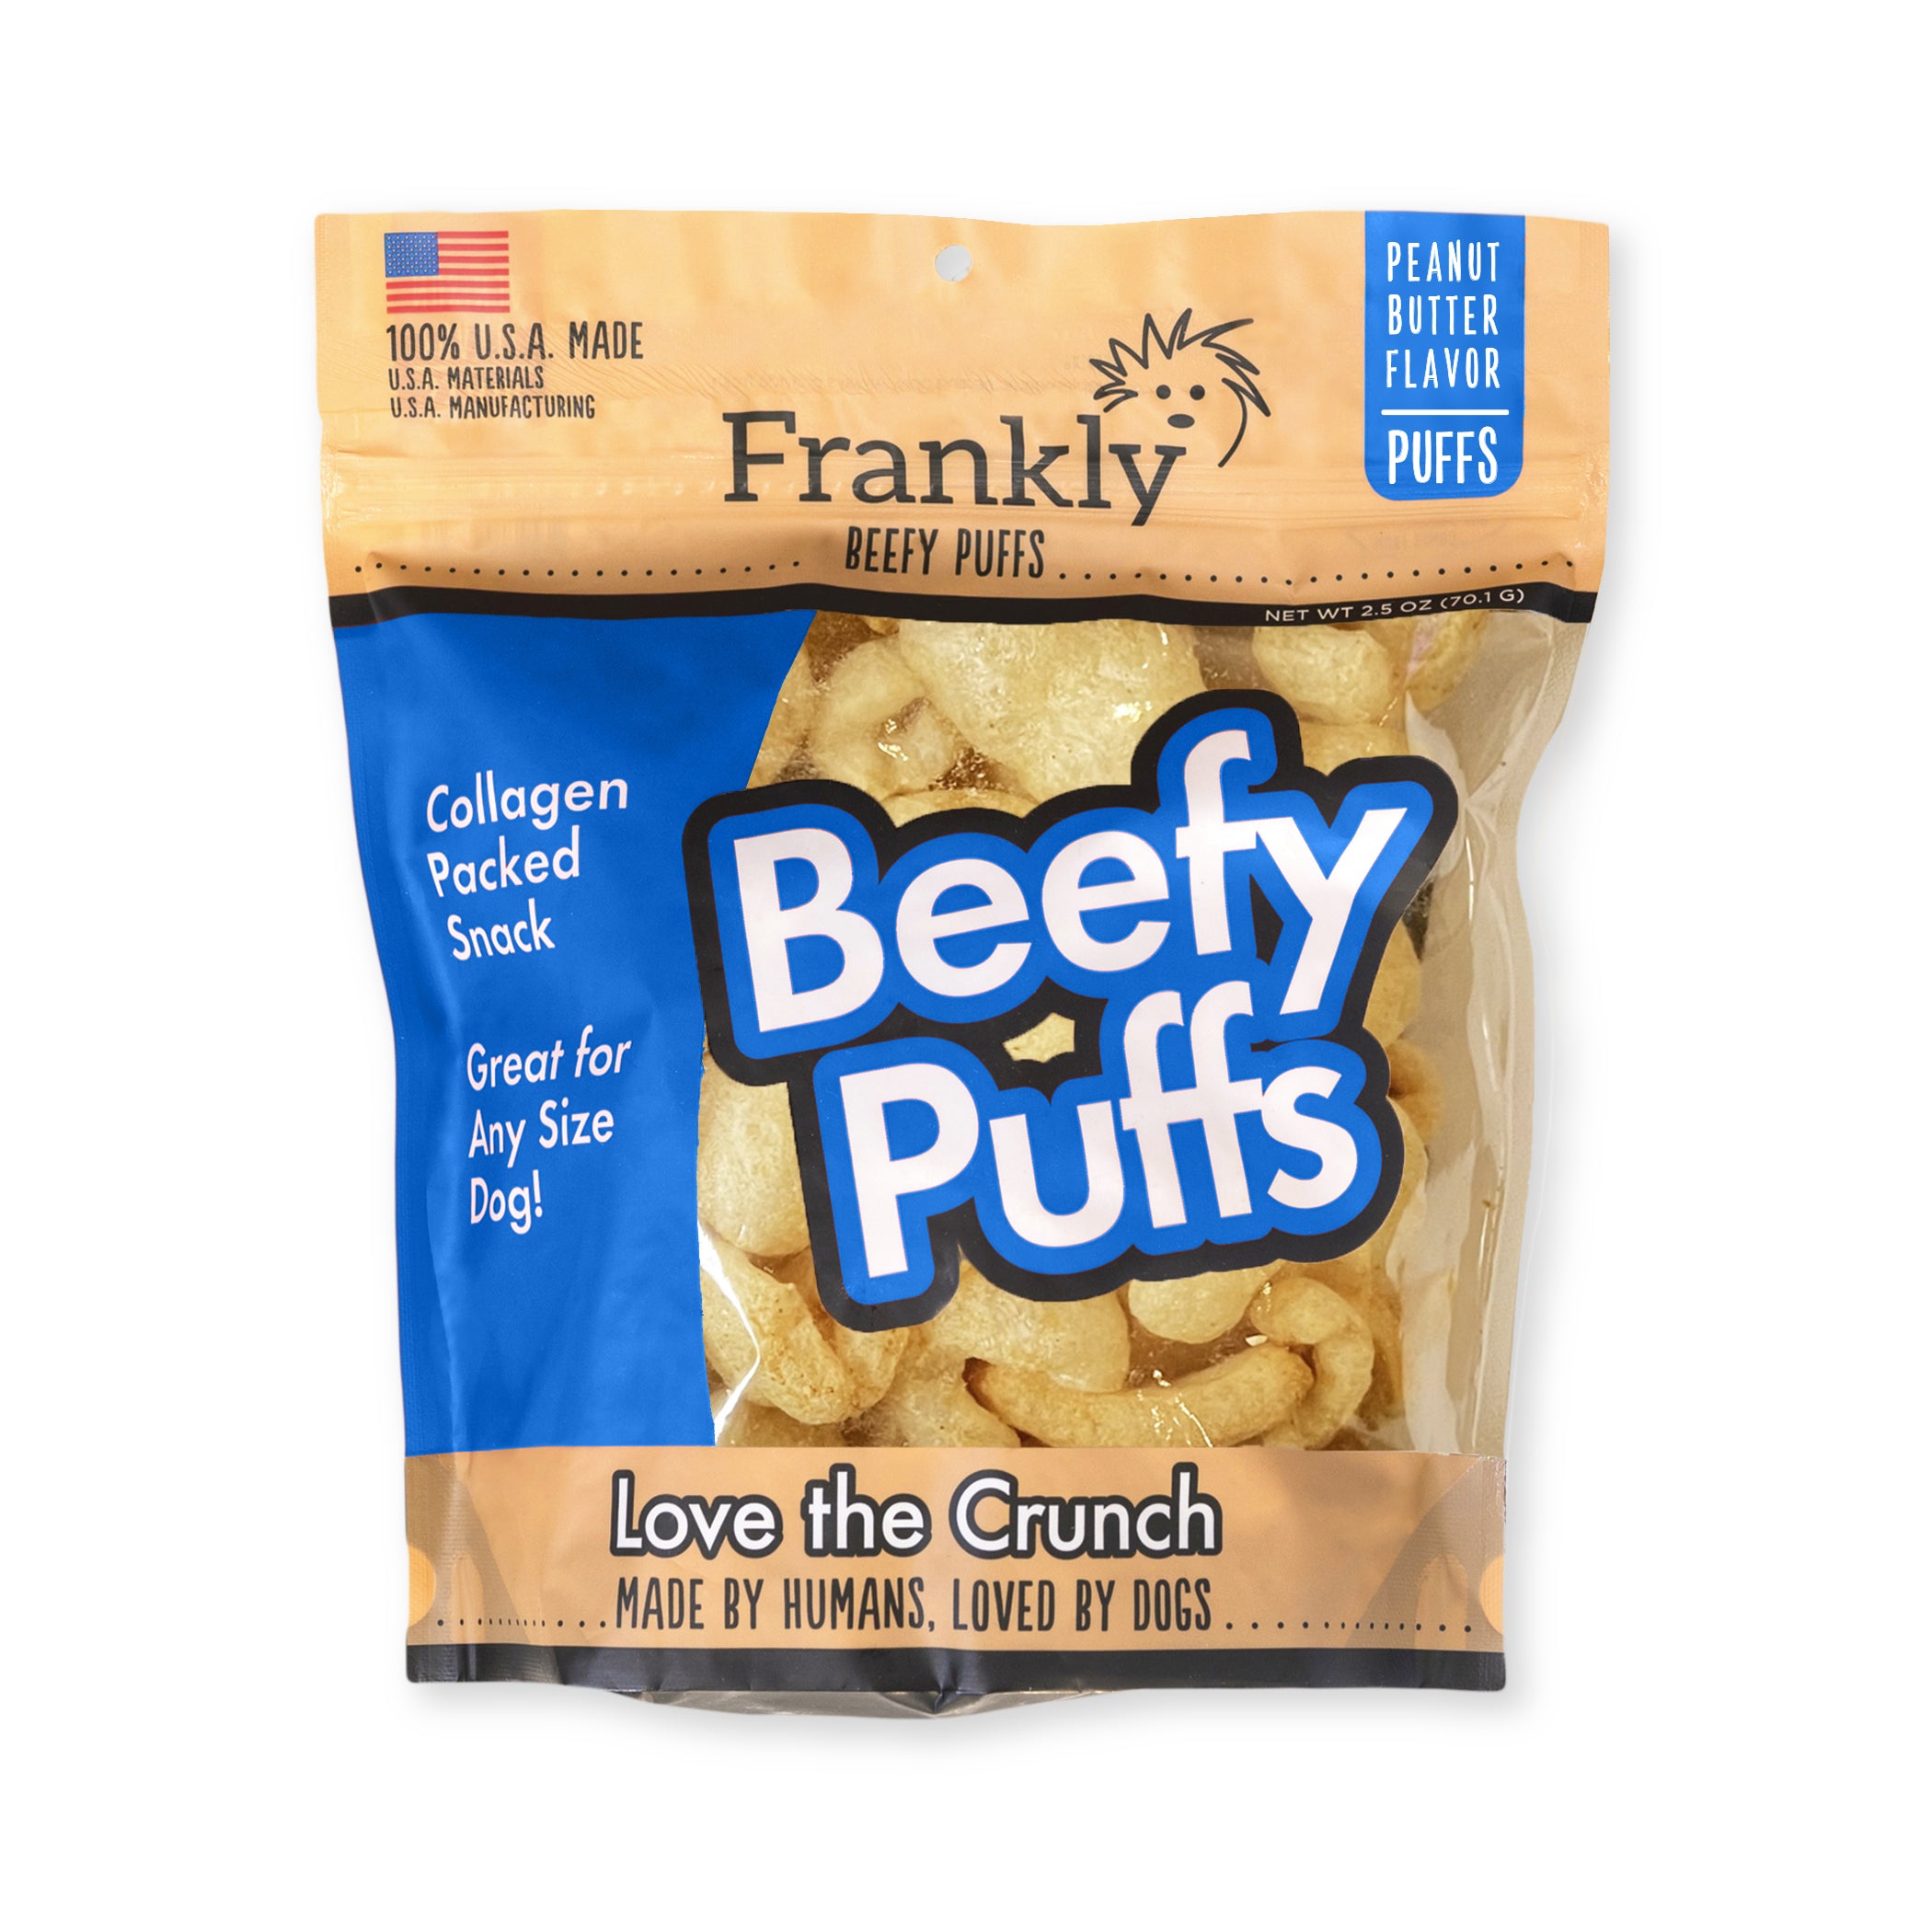 Frankly Pet Beefy Puffs Peanut Butter Dog Treats, 5oz